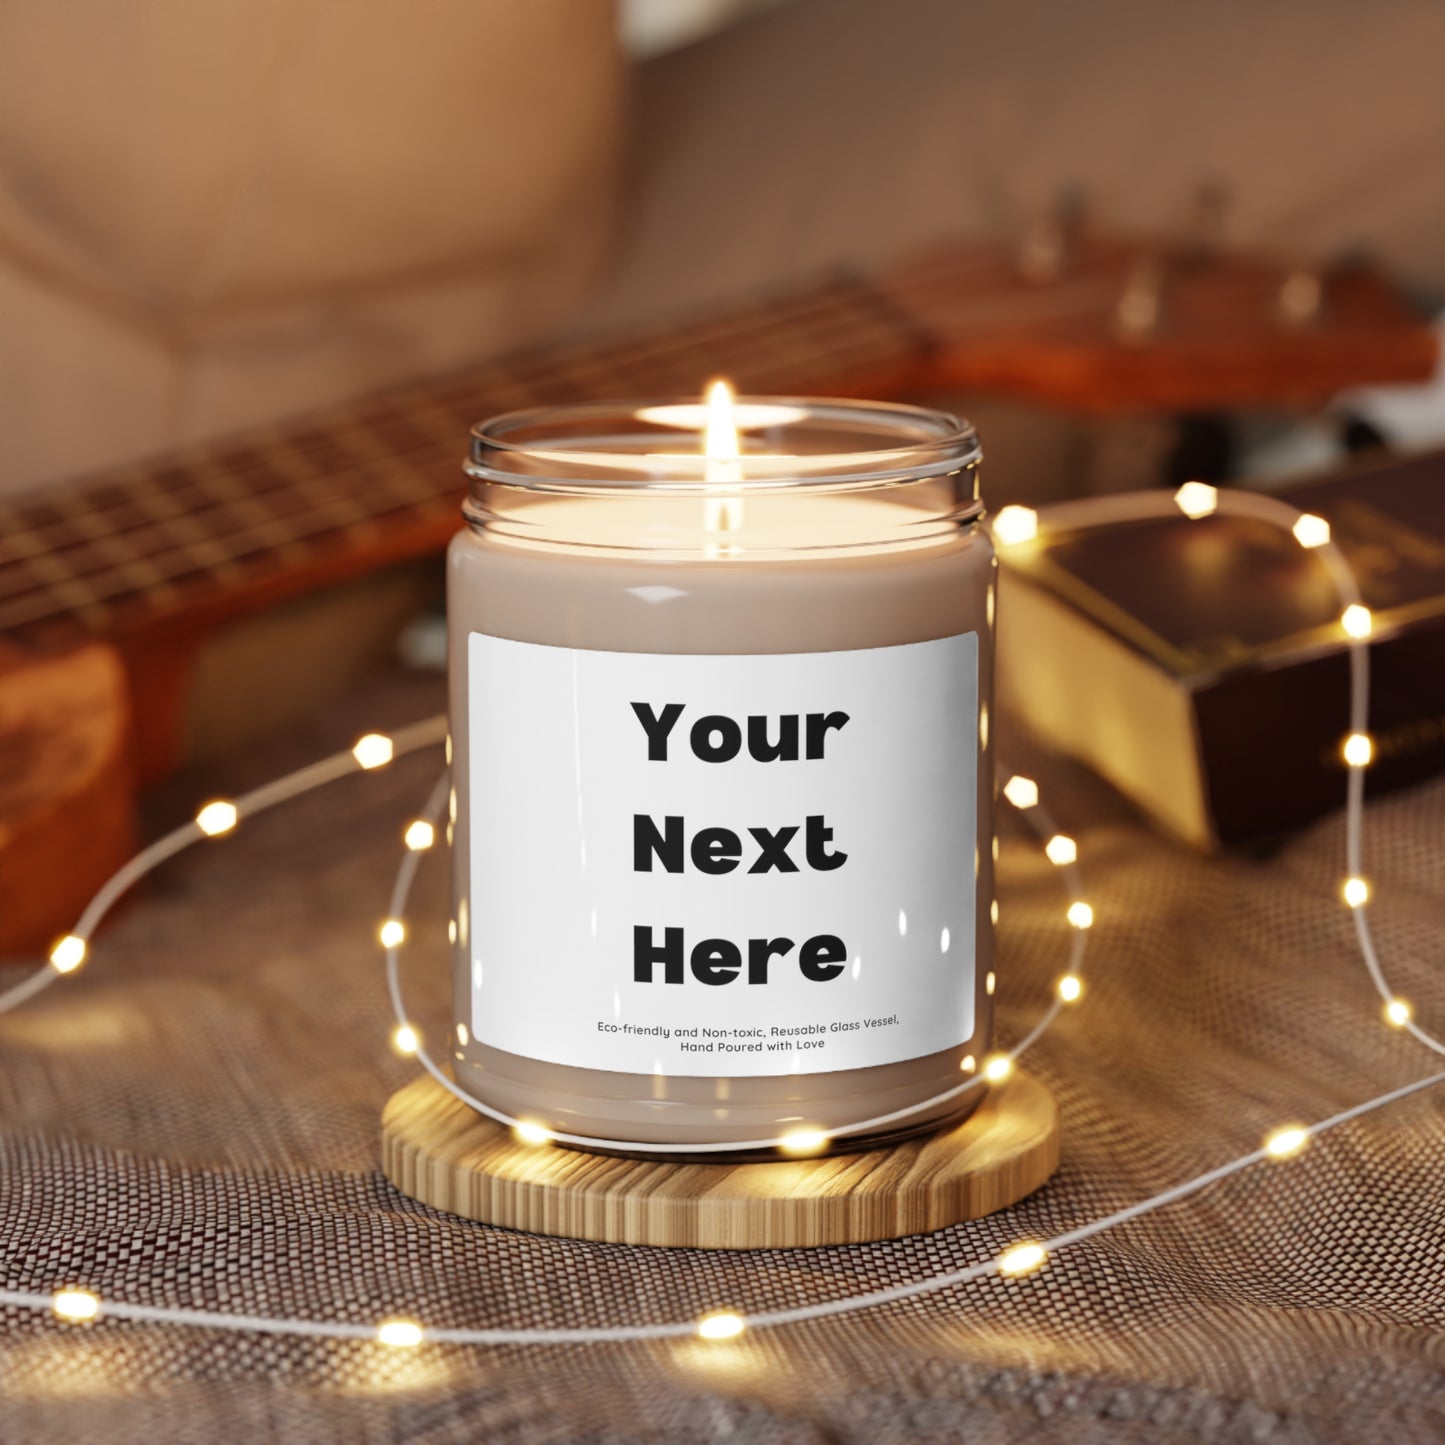 Your Text Here, Custom Scented Candle for Birthday Gift, 9 oz